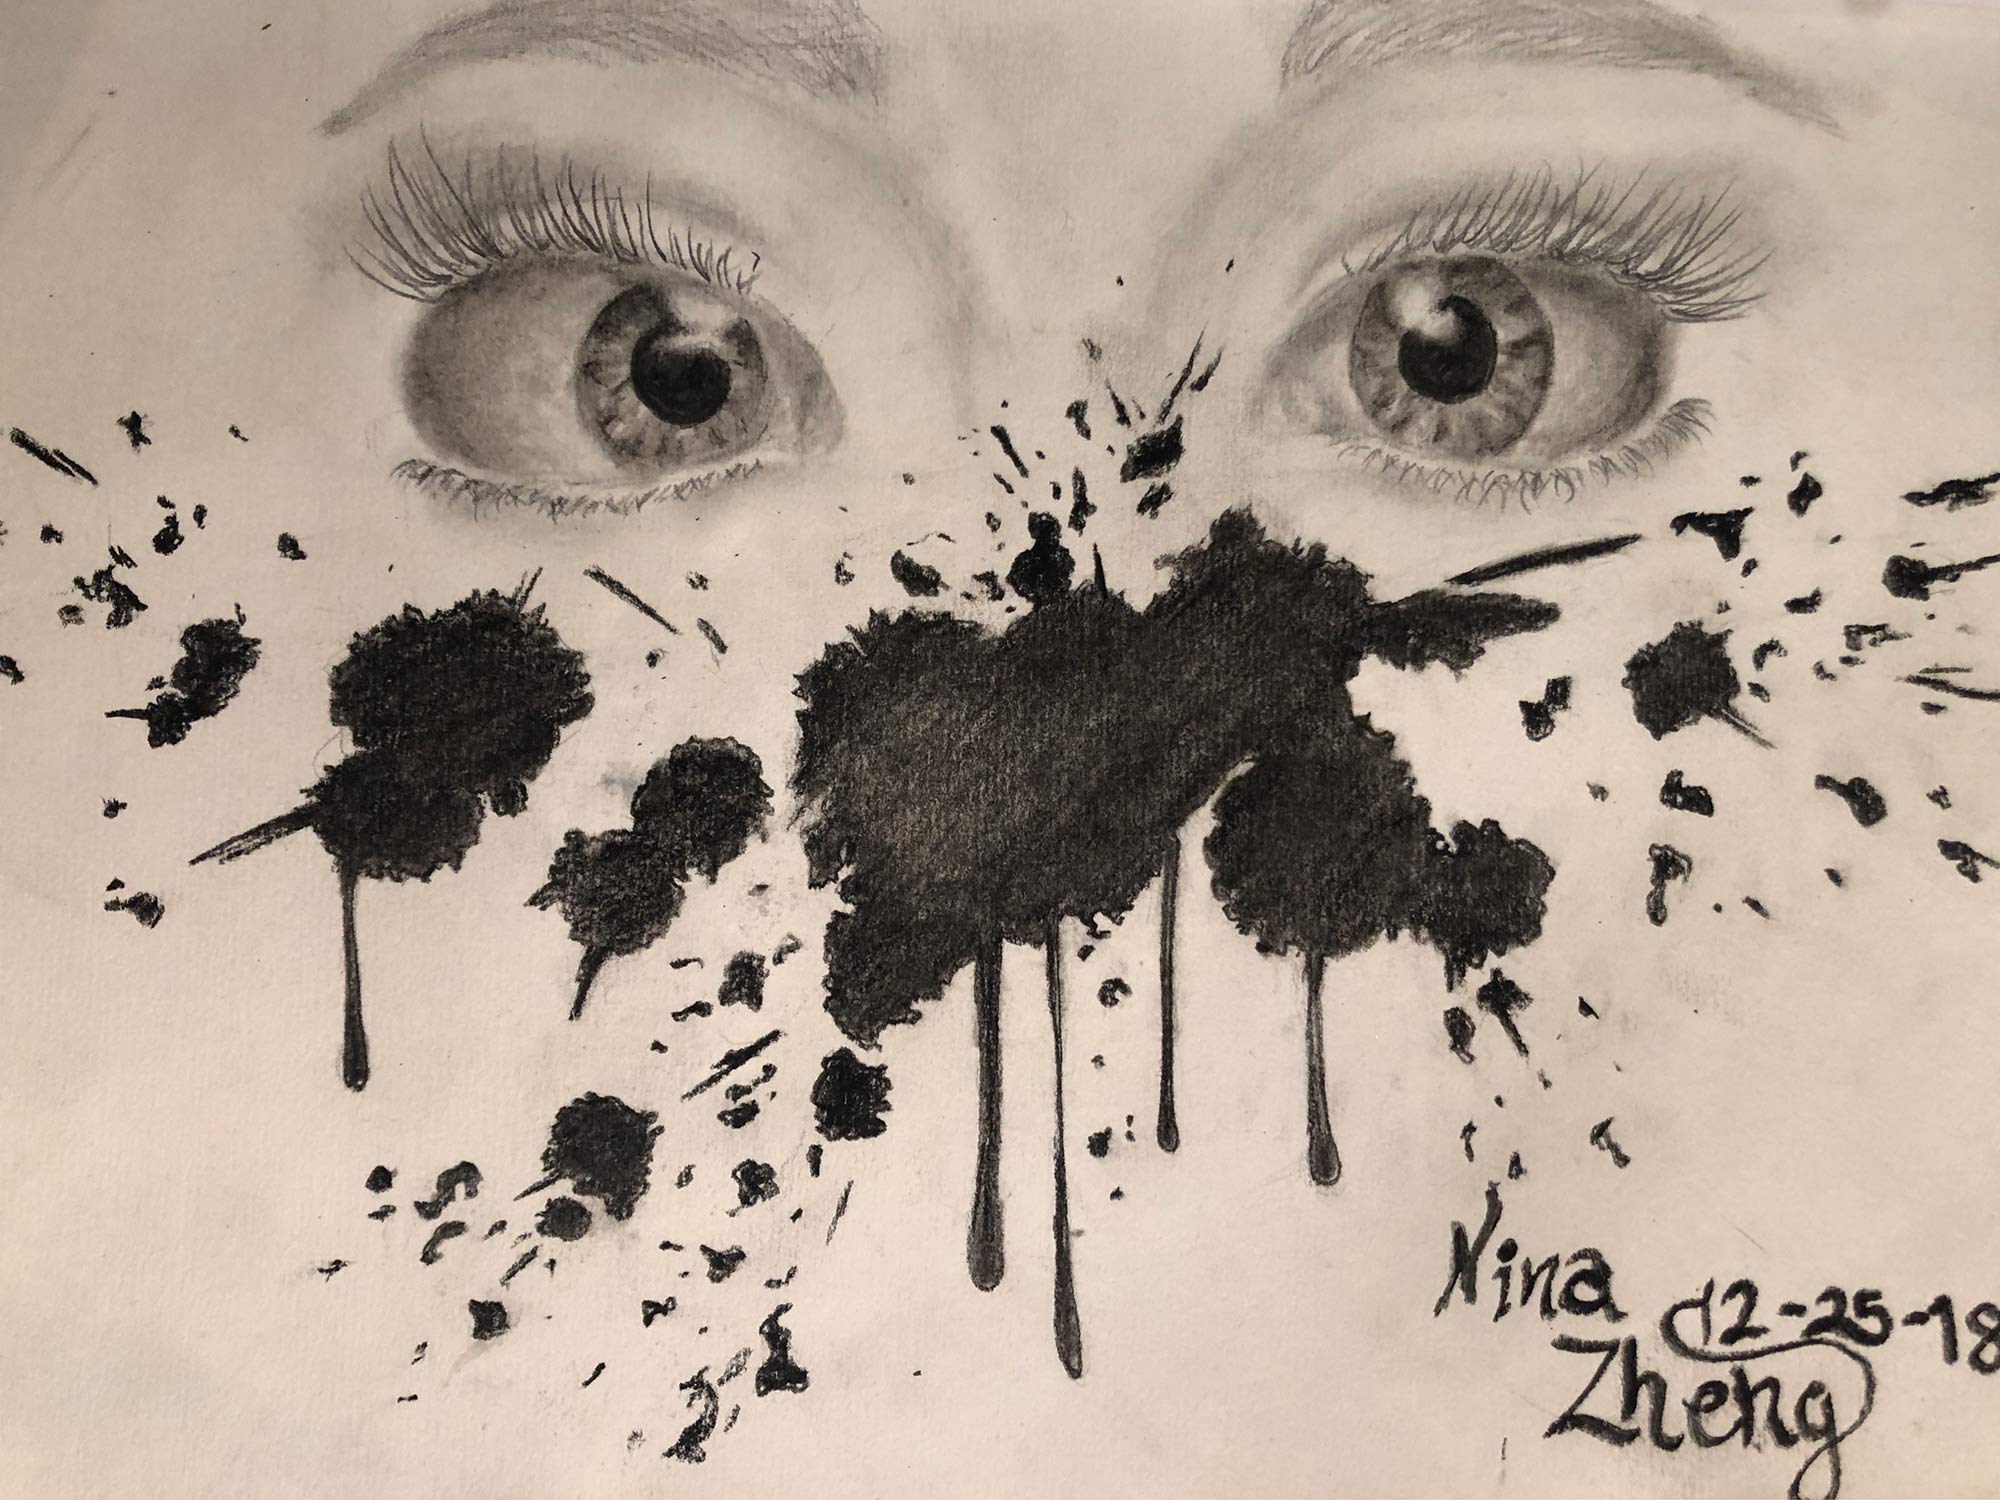 An illustration of two eyes and ink stains